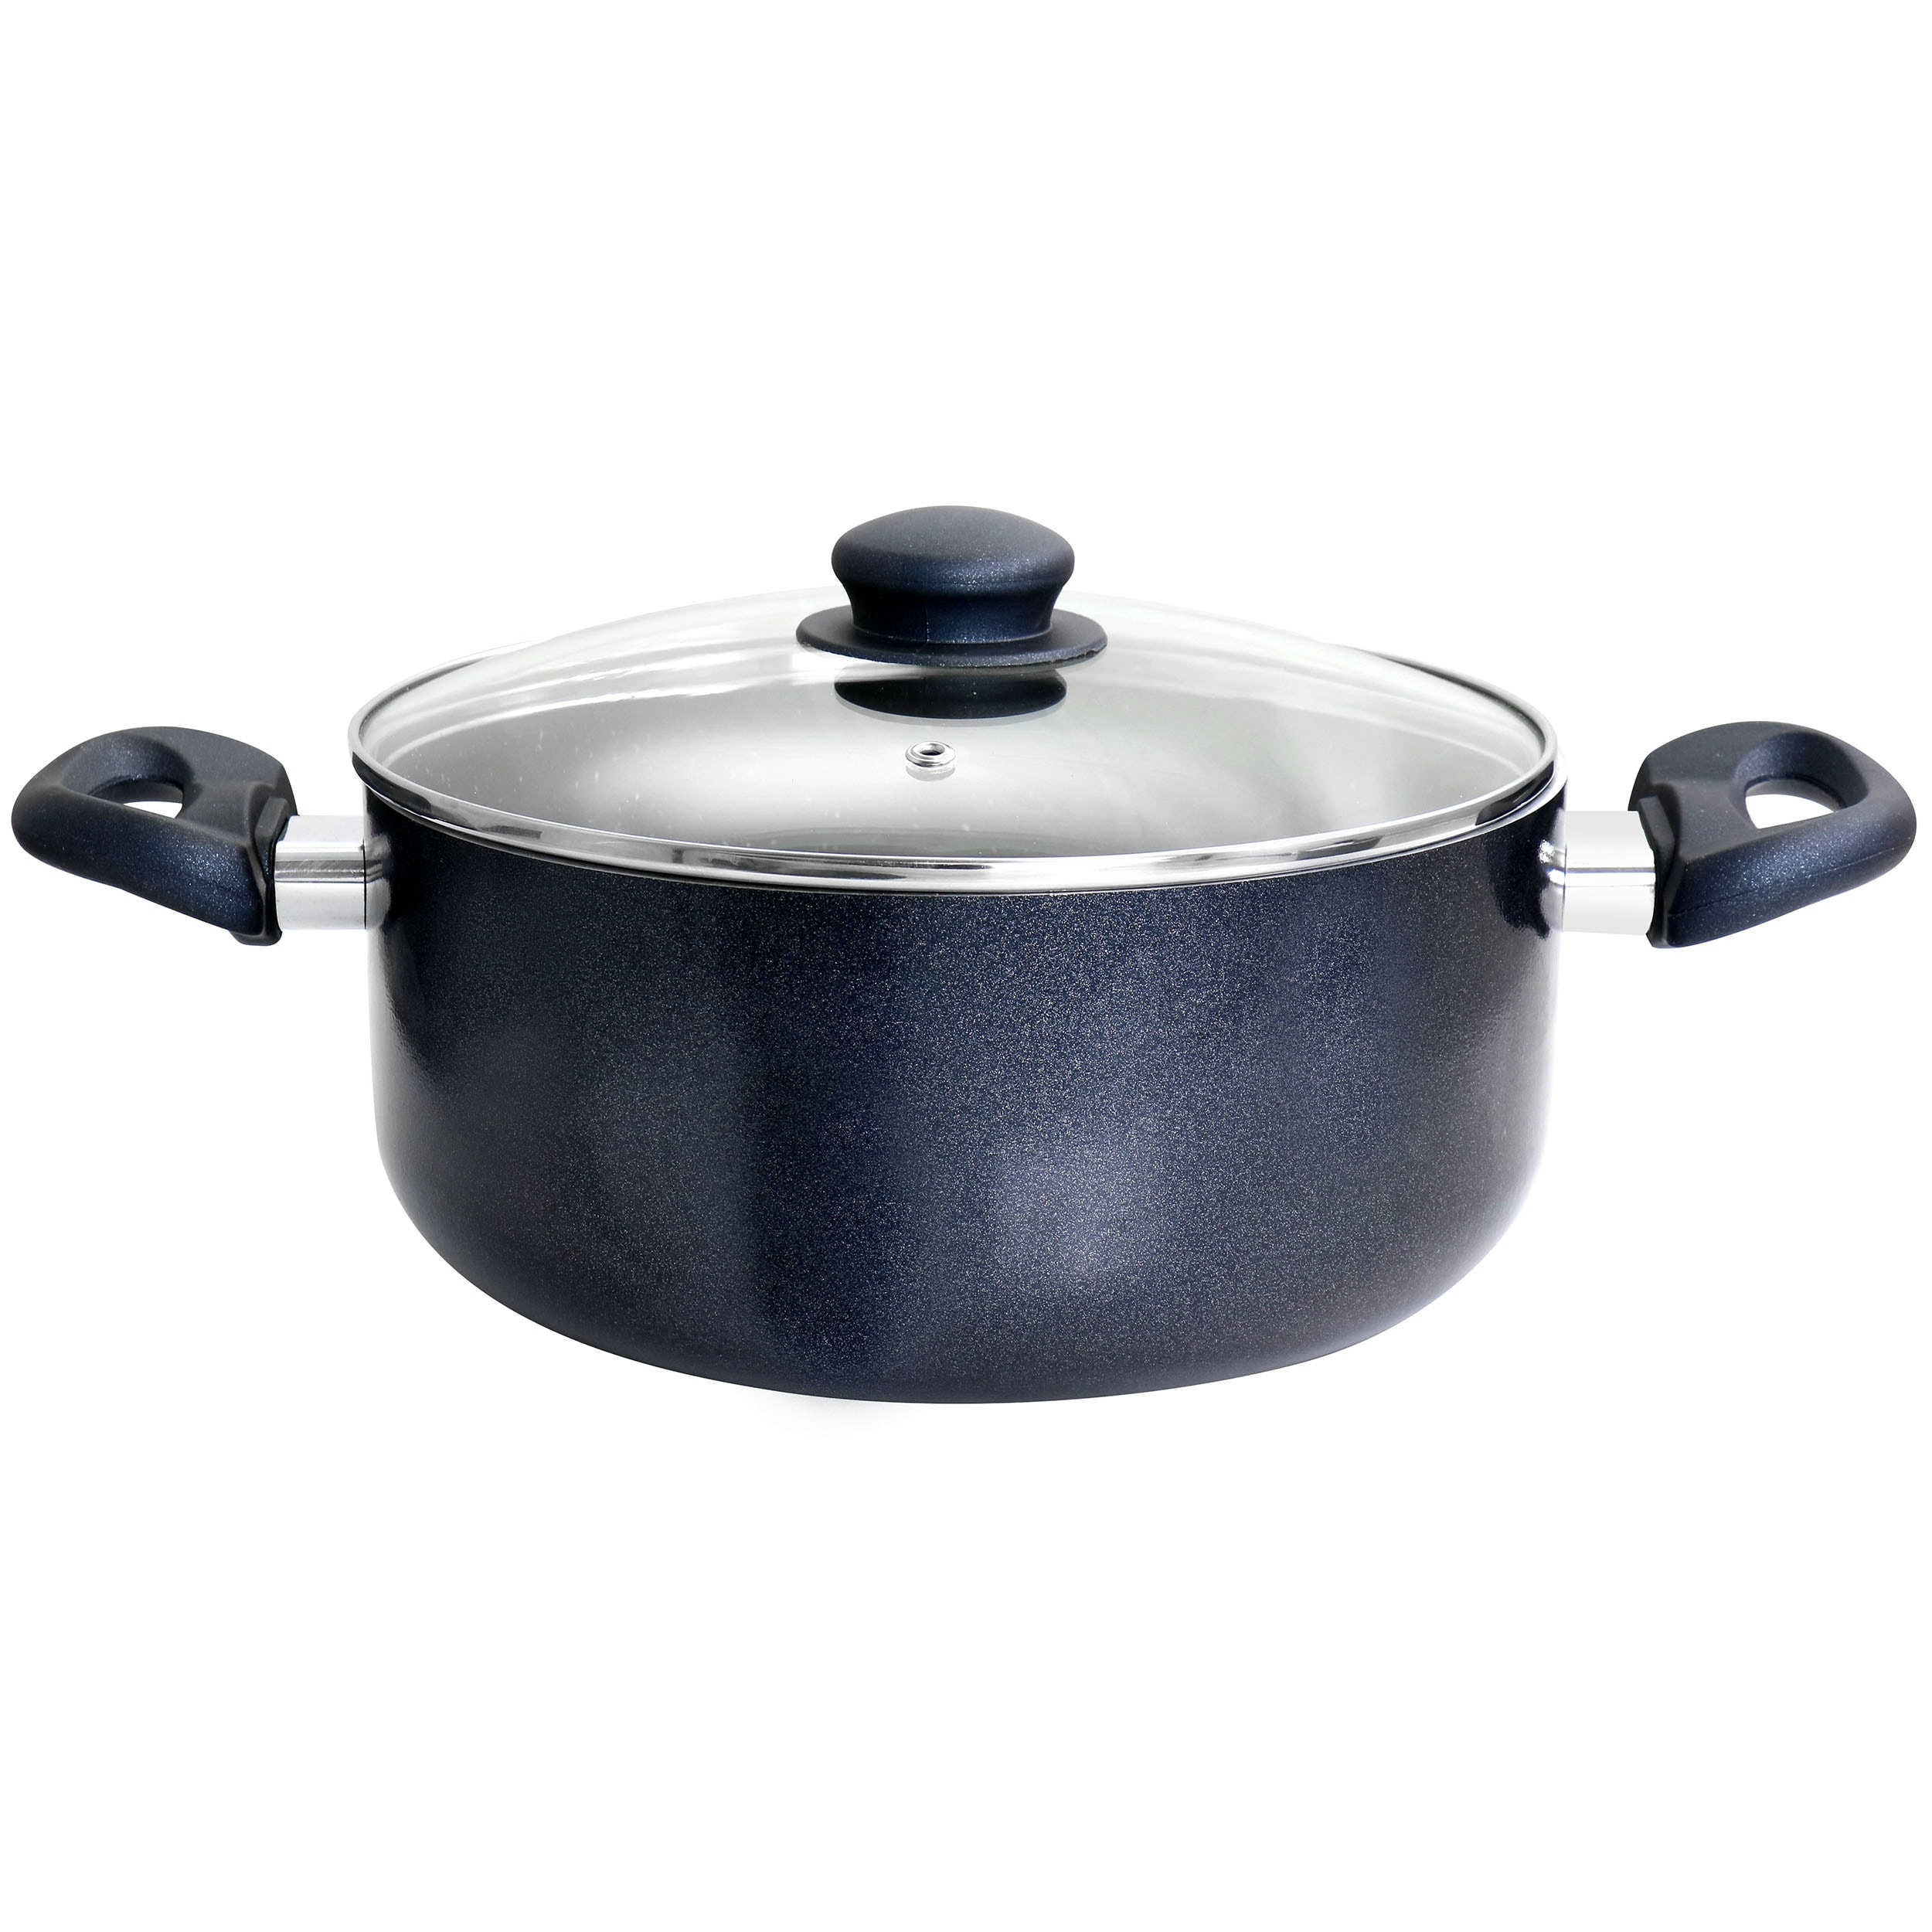 https://ak1.ostkcdn.com/images/products/is/images/direct/97b067130d9ca7730850d73c25adf4b46dd91060/Oster-Anetta-5-Quart-Nonstick-Dutch-Oven-with-Lid-in-Navy-Blue.jpg